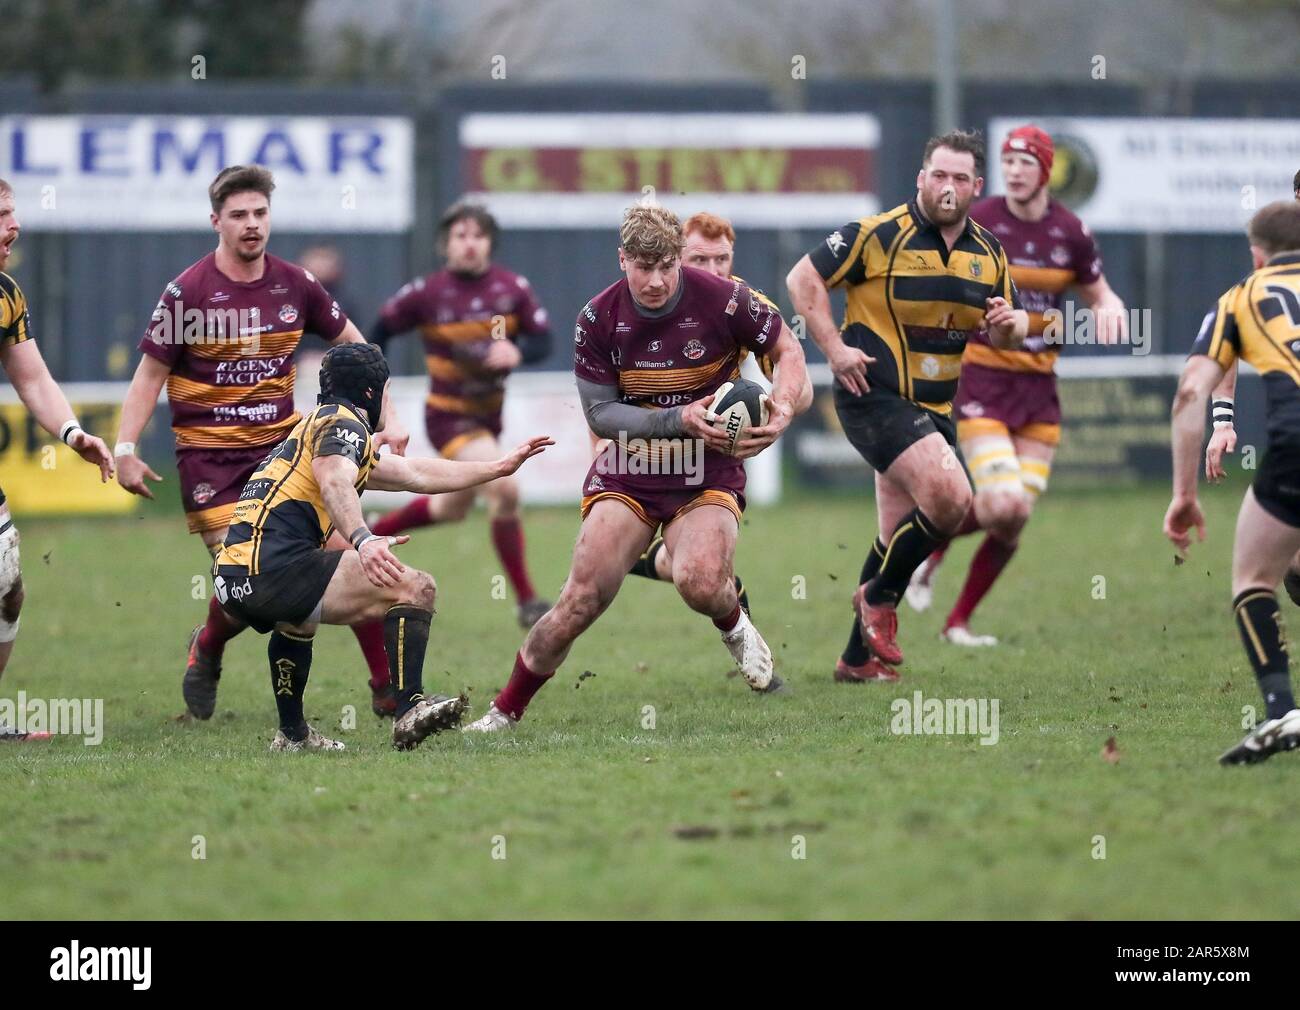 25.01.2020, Hinckley, Leicester, England. Rugby Union, Hinckley rfc v Sedgley Park rfc.   Tom Ailes on the charge Sedgley Park during the RFU National League 2 North (NL2N) game played at the Leicester  Road Stadium. Stock Photo